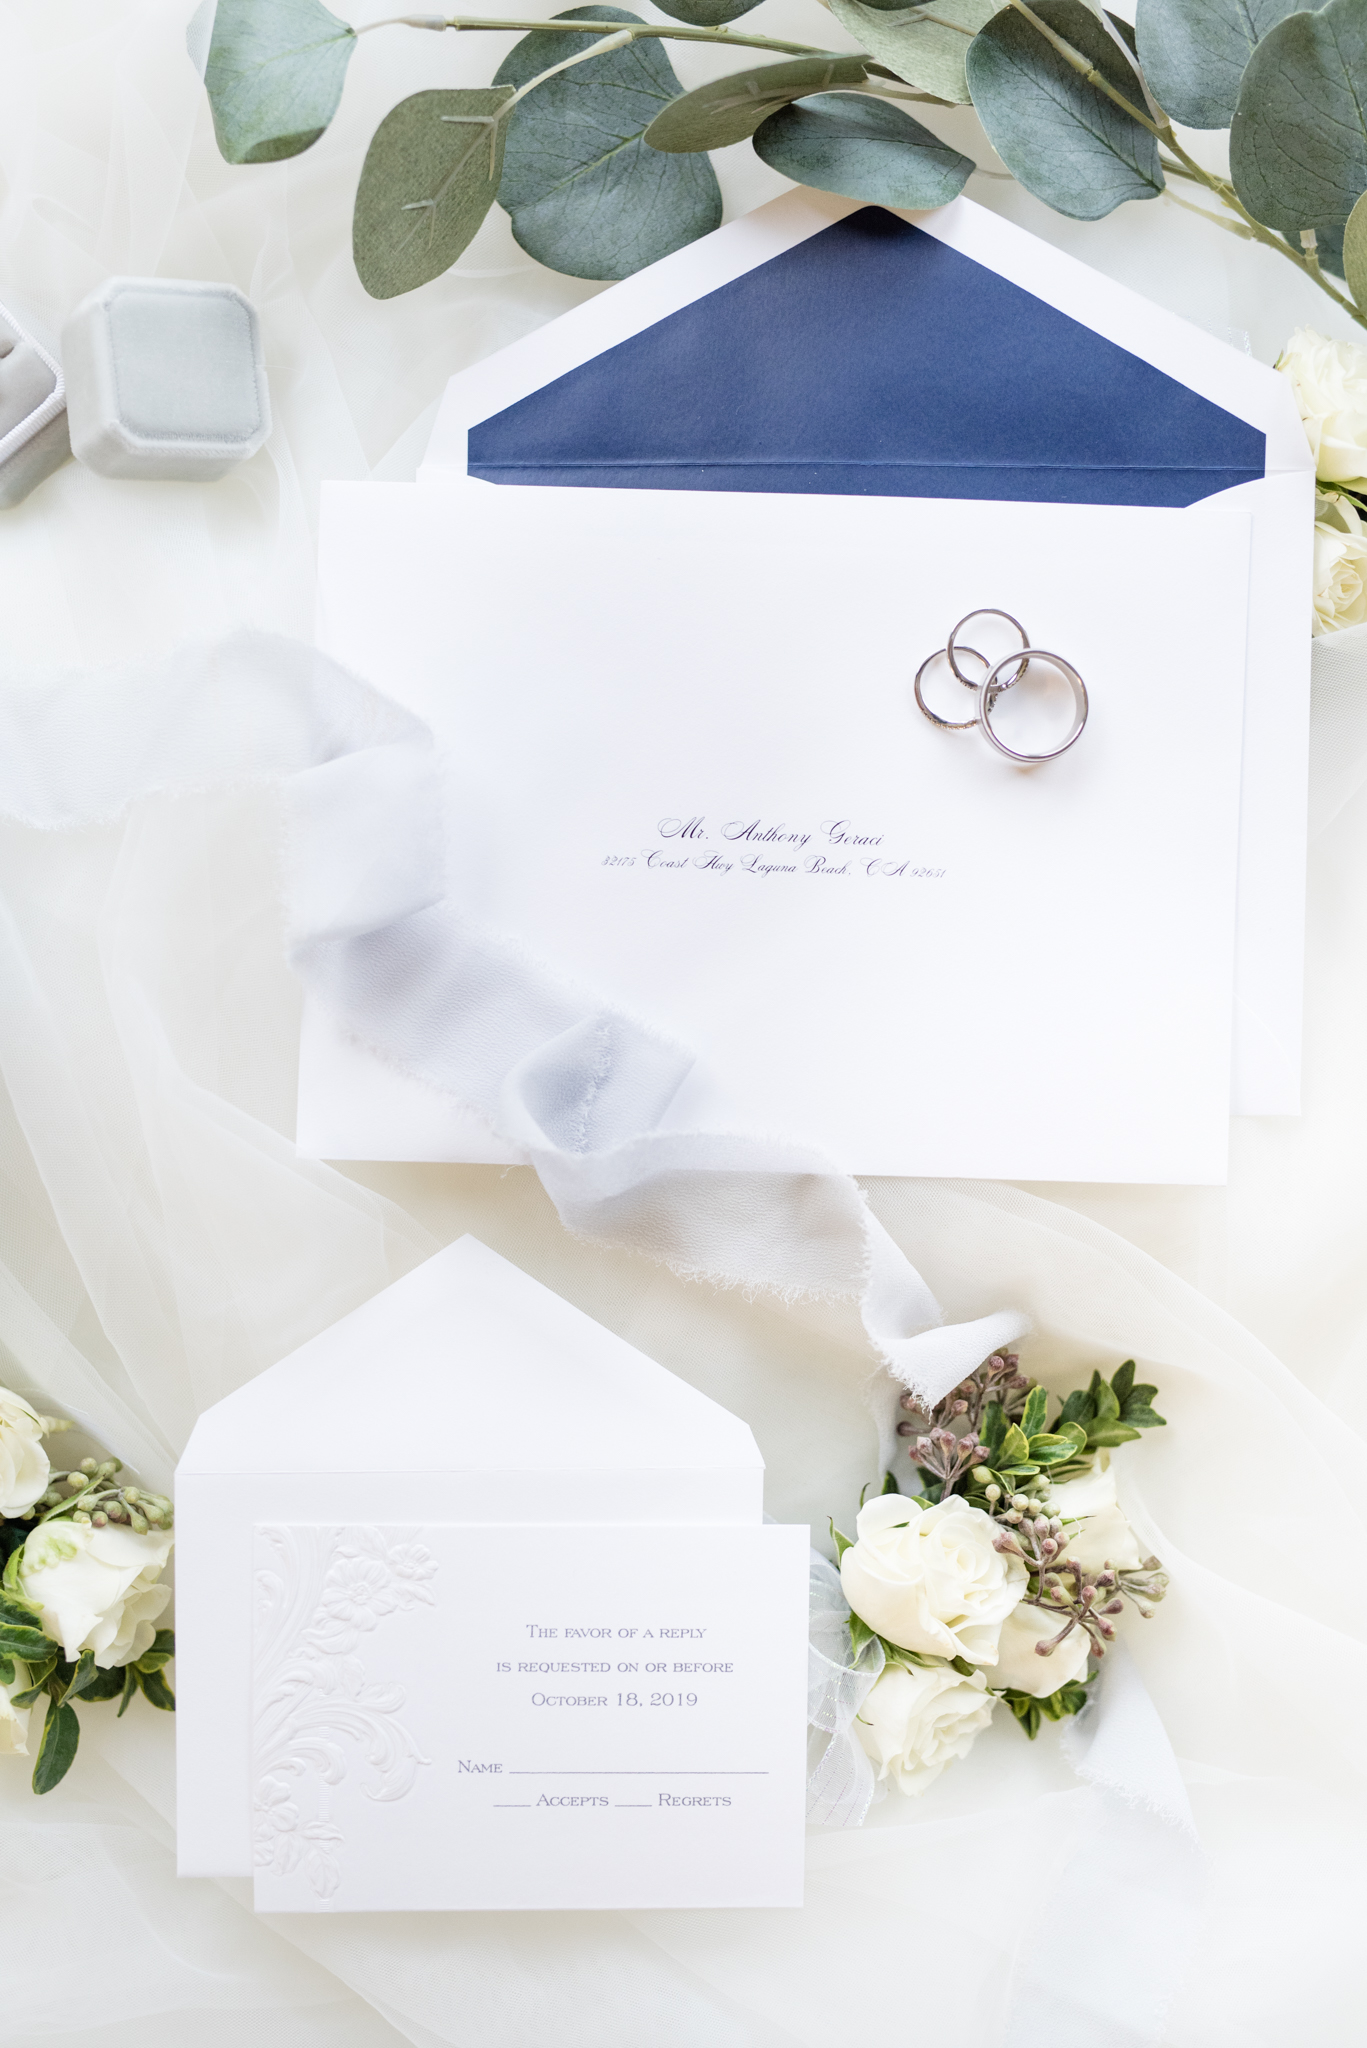 Wedding invitations sits with flowers and rings.